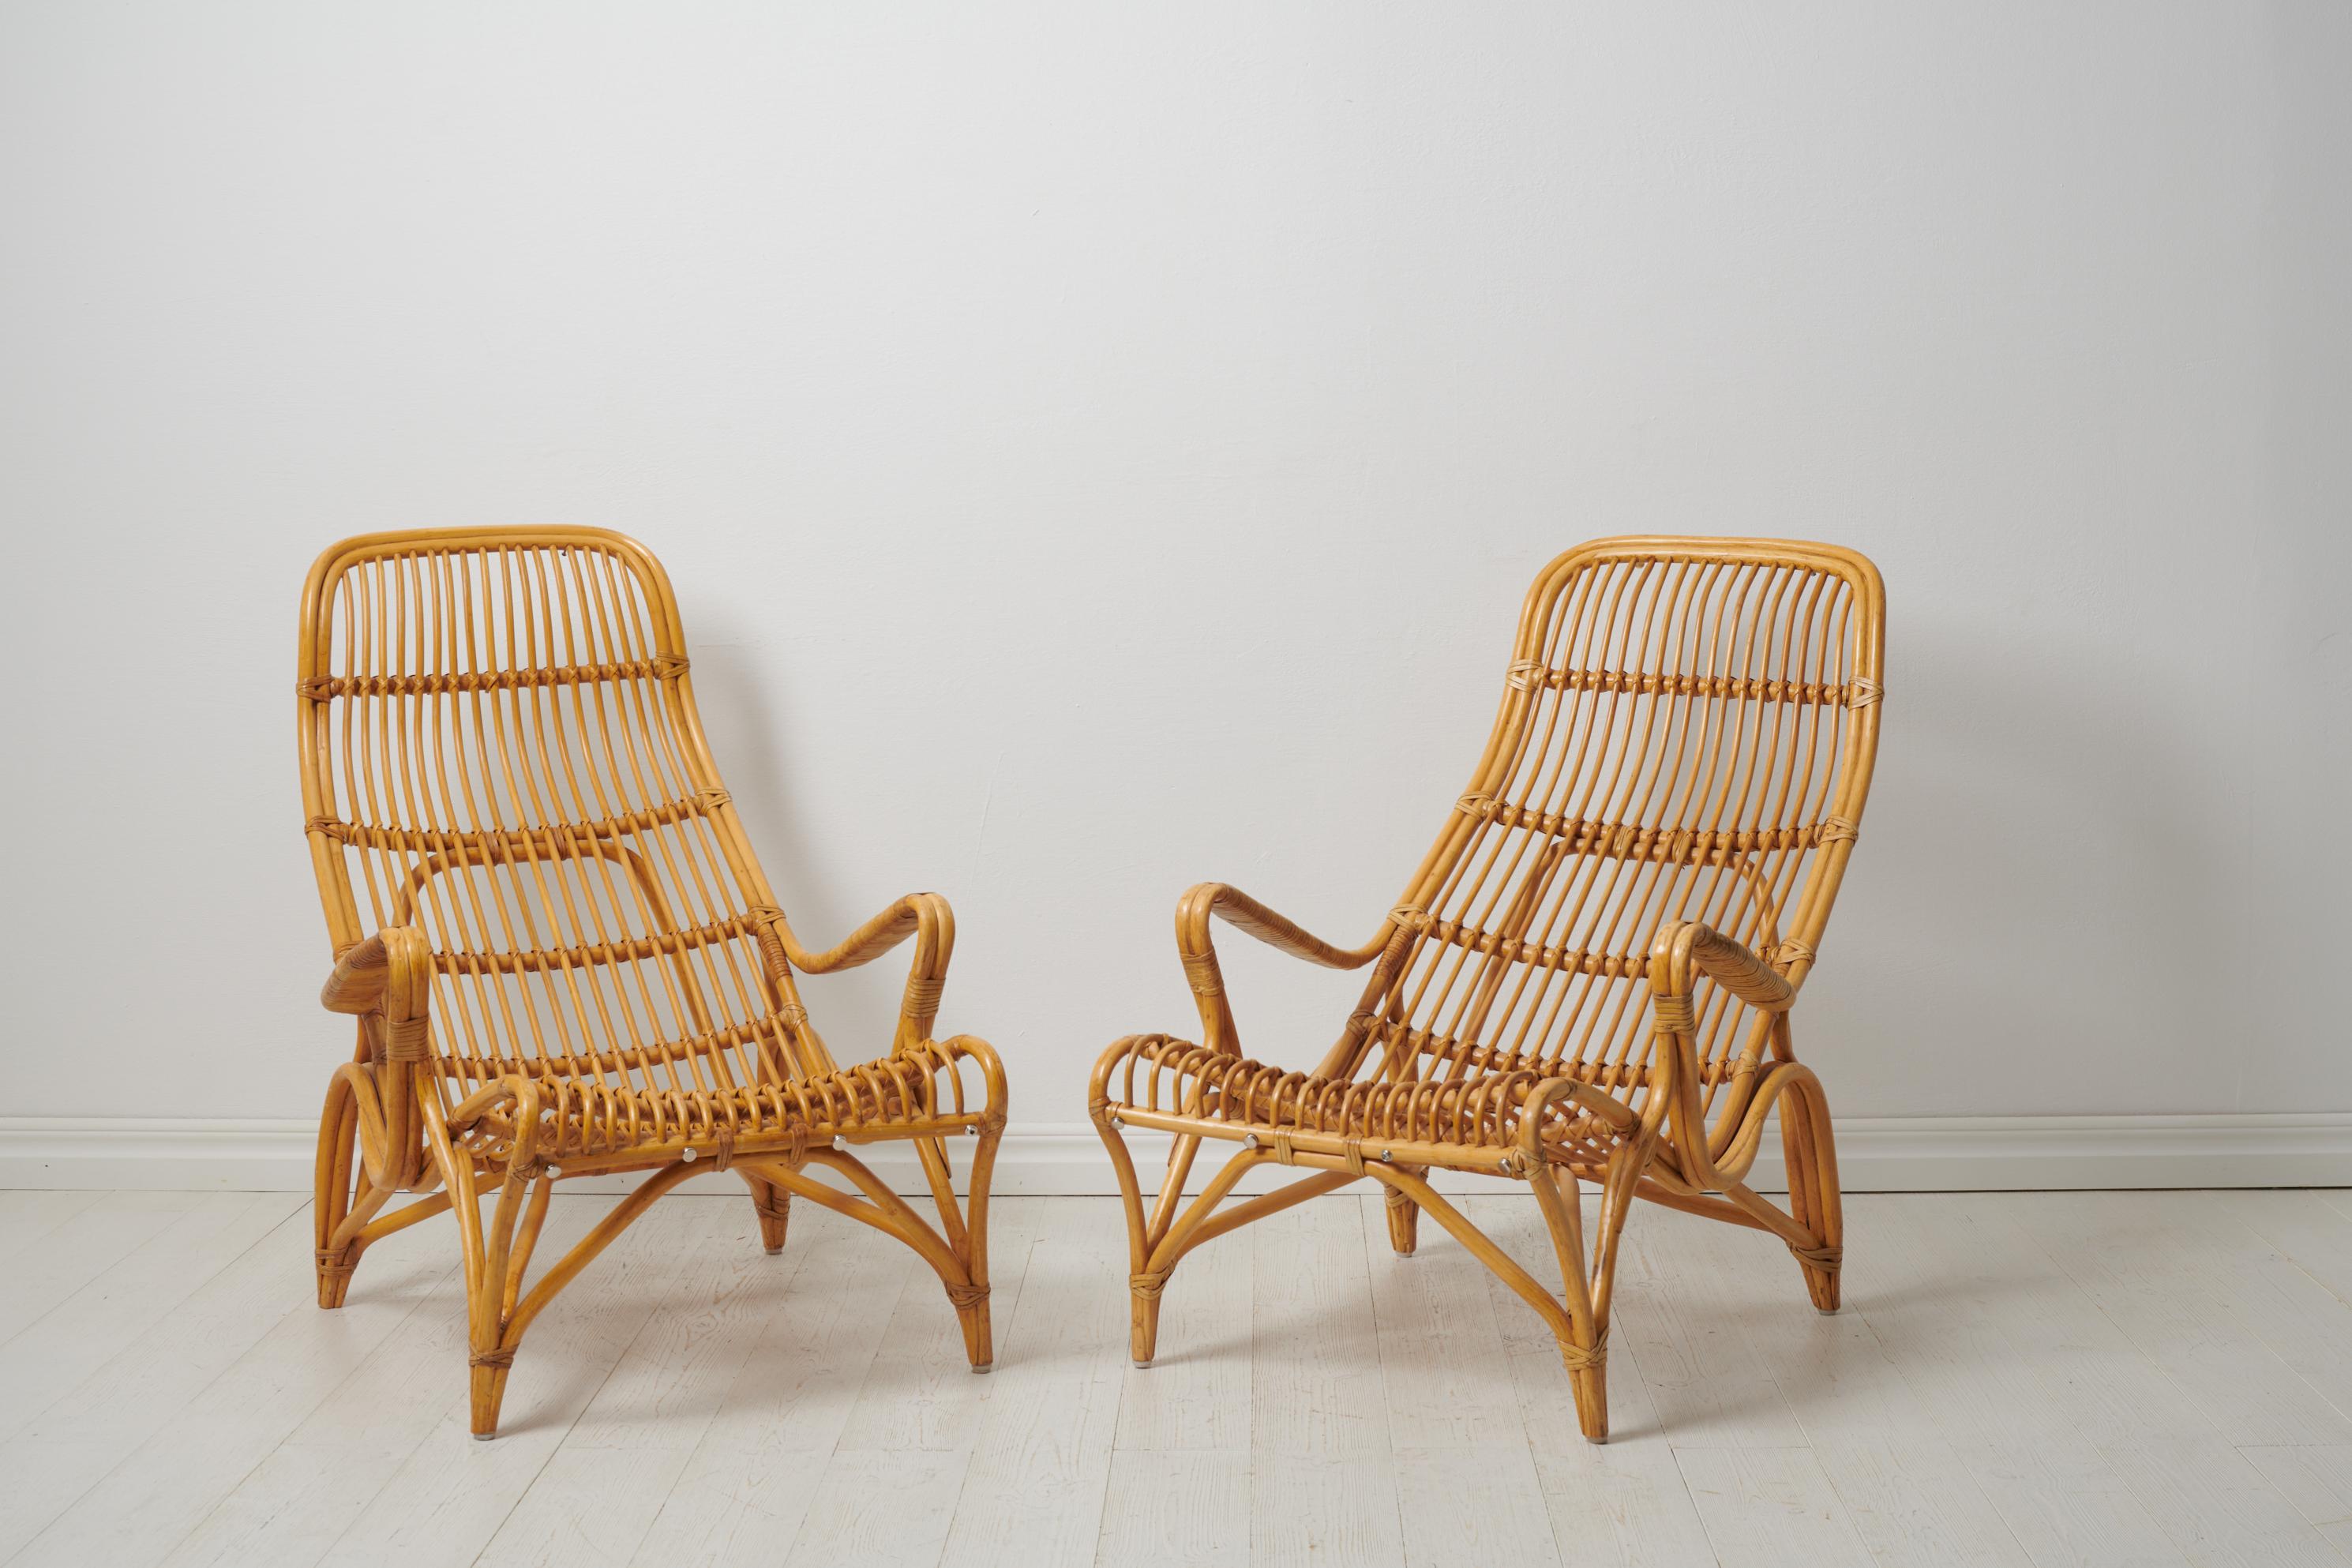 Swedish Modern Bruno Mathsson Pair of Rattan Lounge Chairs and Footstool In Good Condition For Sale In Kramfors, SE